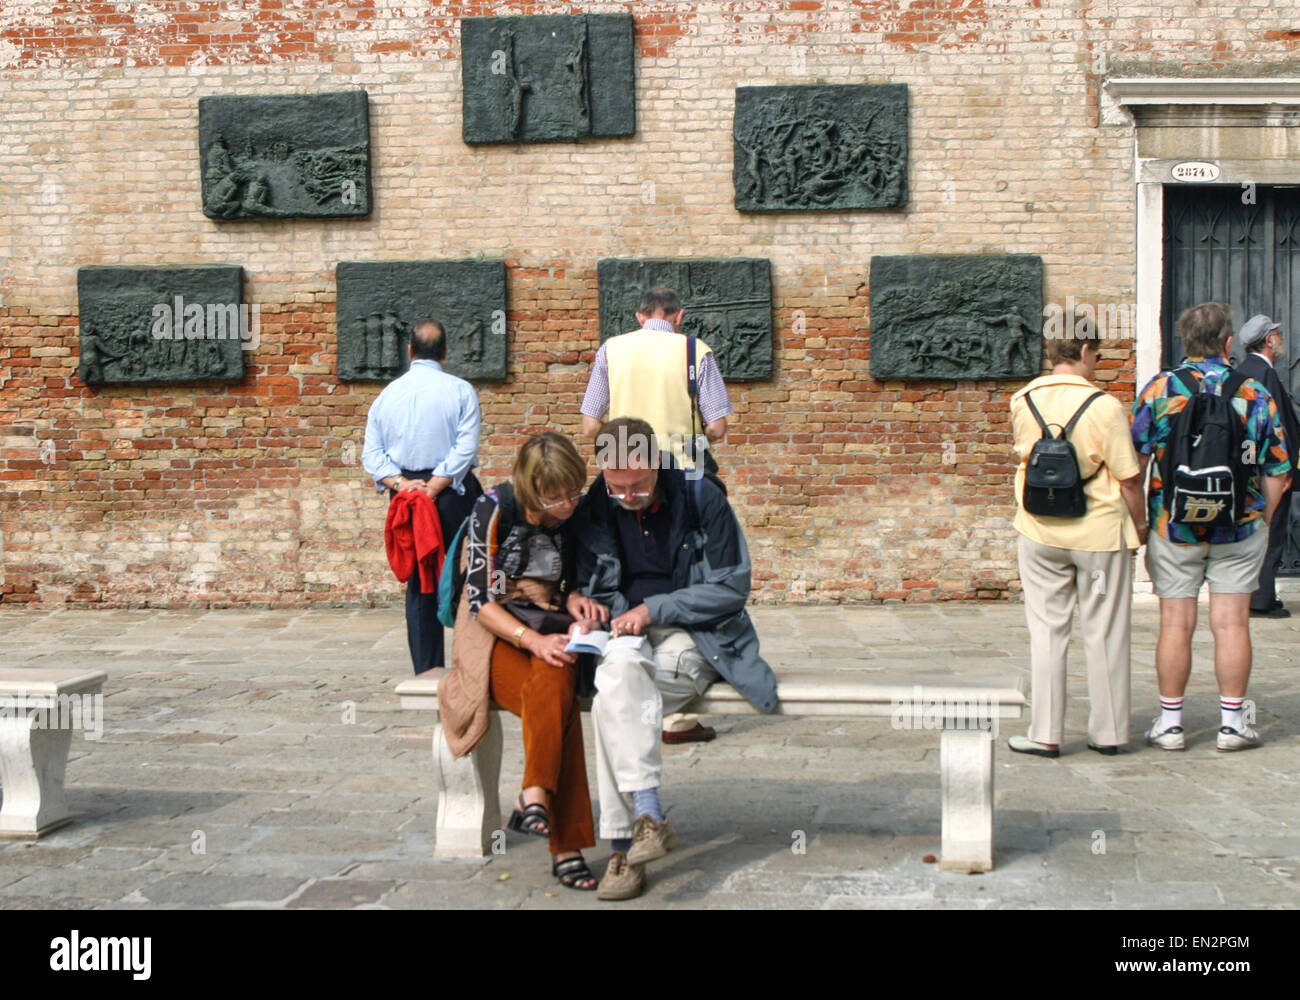 Venice, Province of Venice, ITALY. 7th Oct, 2004. A young couple on a bench read a guide book as other tourists view the seven-panel bronze bas-relief Holocaust memorial, on a wall of the Campo del Nuovo Ghetto by Arbit Blatas, a Lithuanian-born artist who lost his mother in the Holocaust. It commemorates the night of Dec. 5, 1943, when the first 200 of the city's Jews were rounded up and marched out for deportation and death. Venice, a UNESCO World Heritage Site, is one of the most popular international tourist destinations. © Arnold Drapkin/ZUMA Wire/Alamy Live News Stock Photo